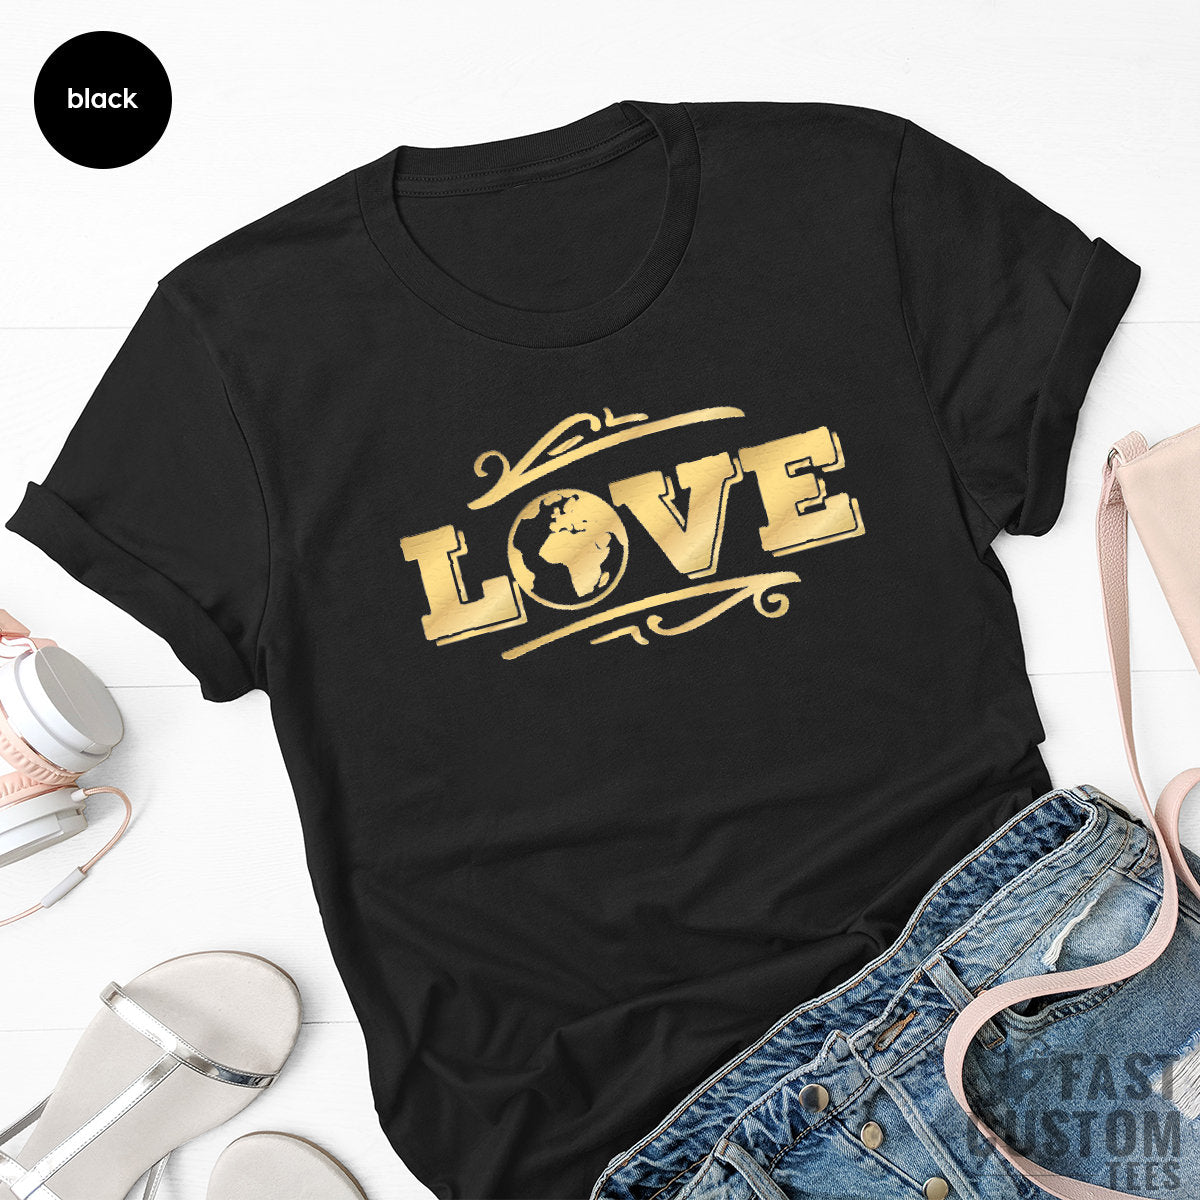 Love Our Planet T-Shirt, Earth Days T Shirt, Recycling TShirt, Environment Shirt, Teachers Shirt, Gift For Activist, Nature Lover Tees - Fastdeliverytees.com